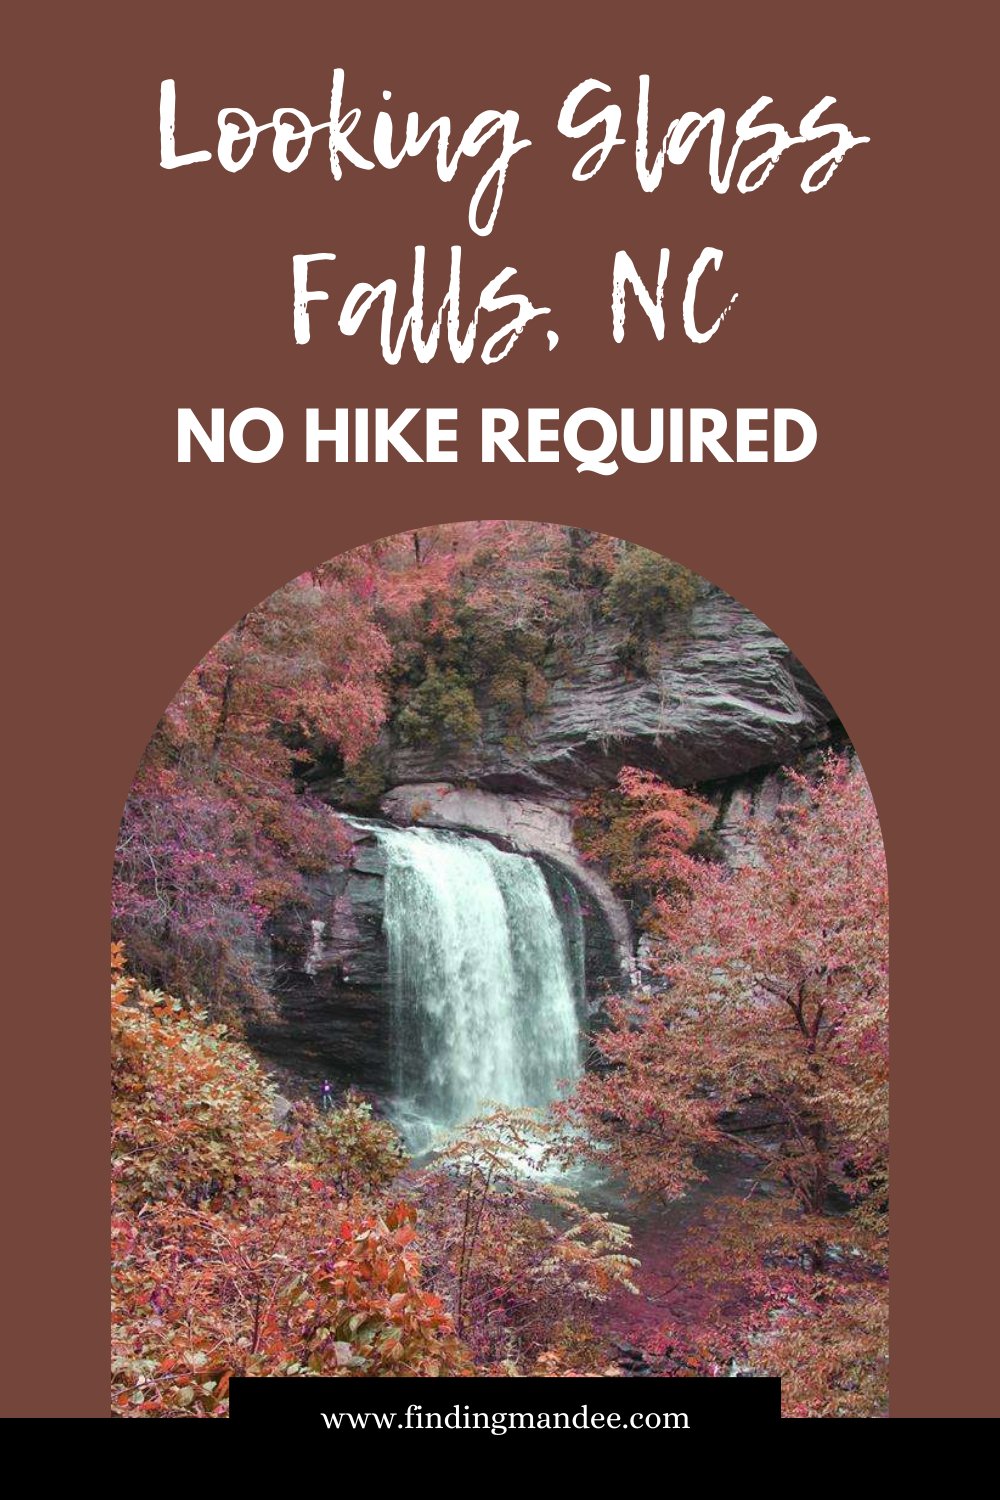 Looking Glass Falls: No Hike Required | Finding Mandee